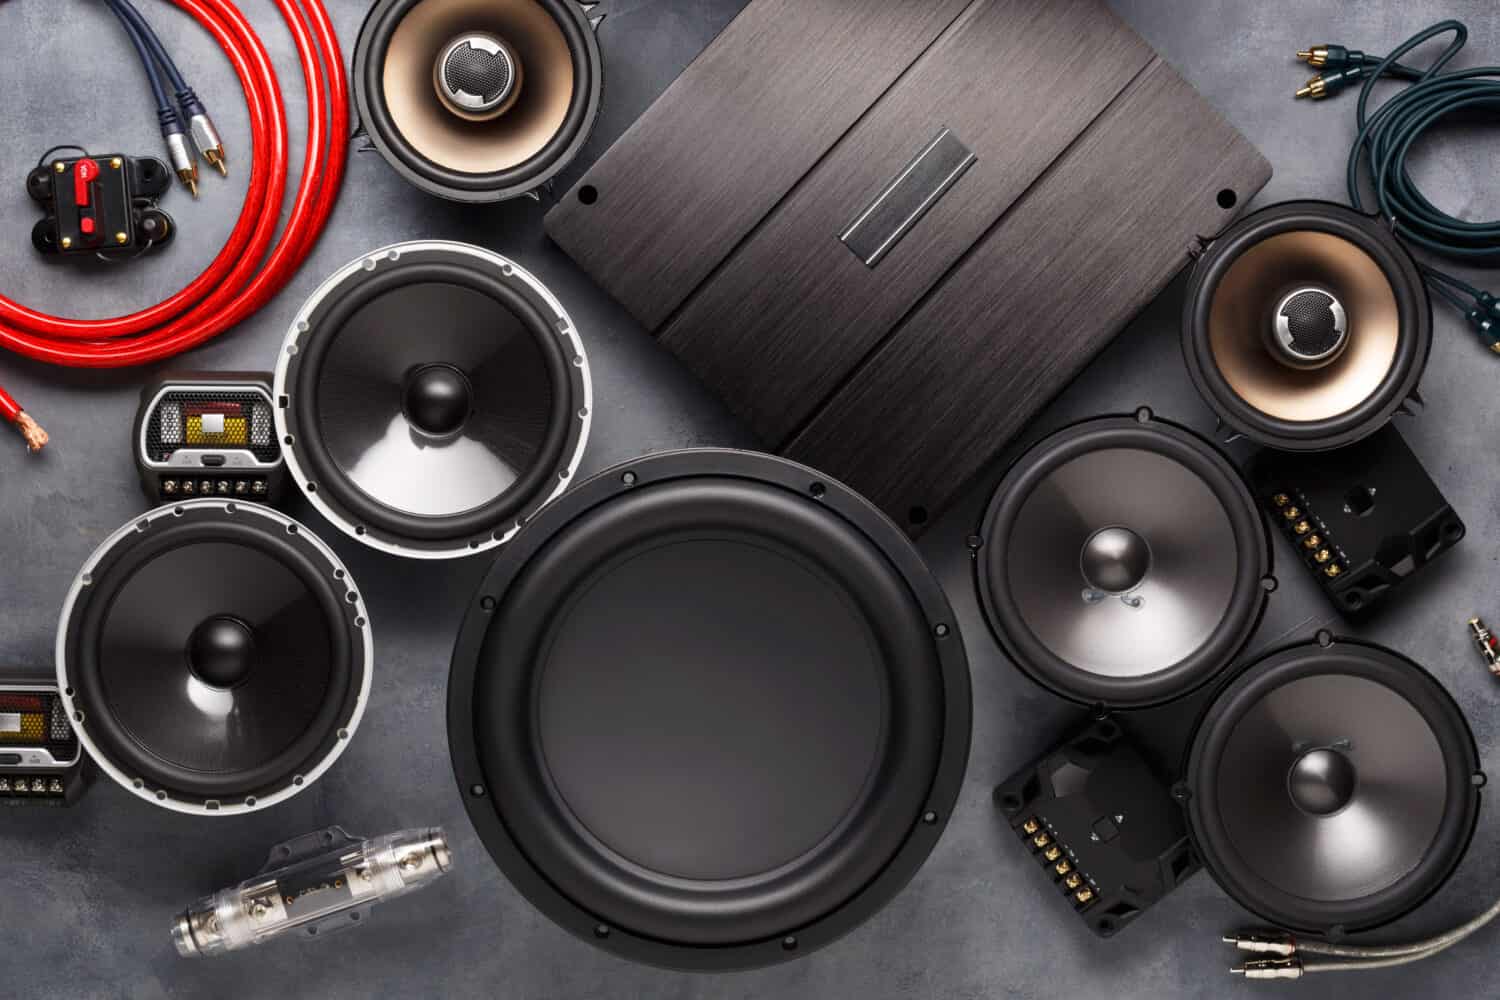 car audio, car speakers, subwoofer and accessories for tuning. Dark background. Top view.